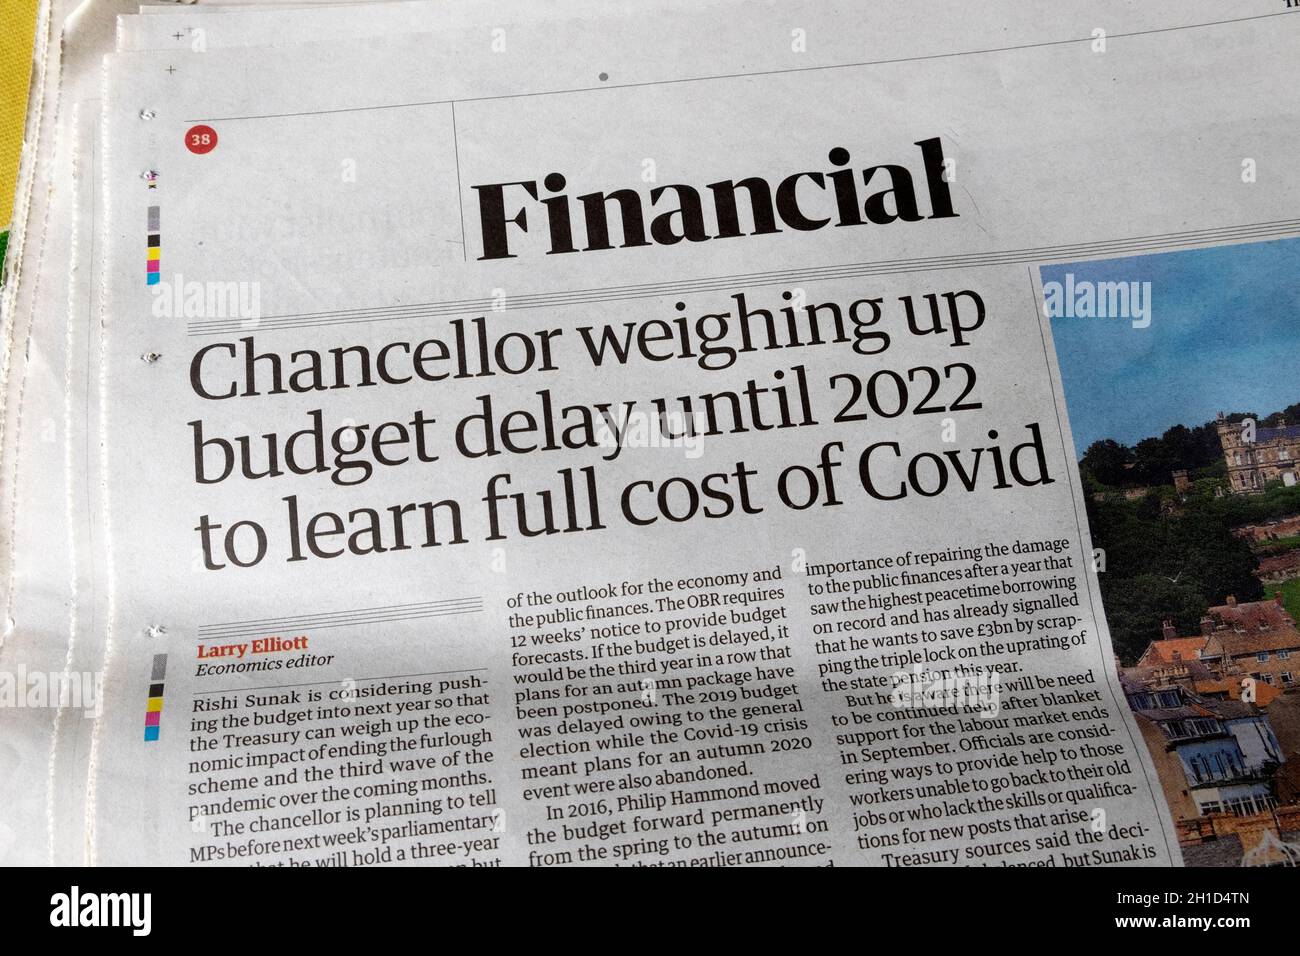 Guardian Financial newspaper headline Rishi Sunak "Chancellor weighing up budget delay until 2022 to learn full cost of covid" 16 July 2021 London UK Stock Photo